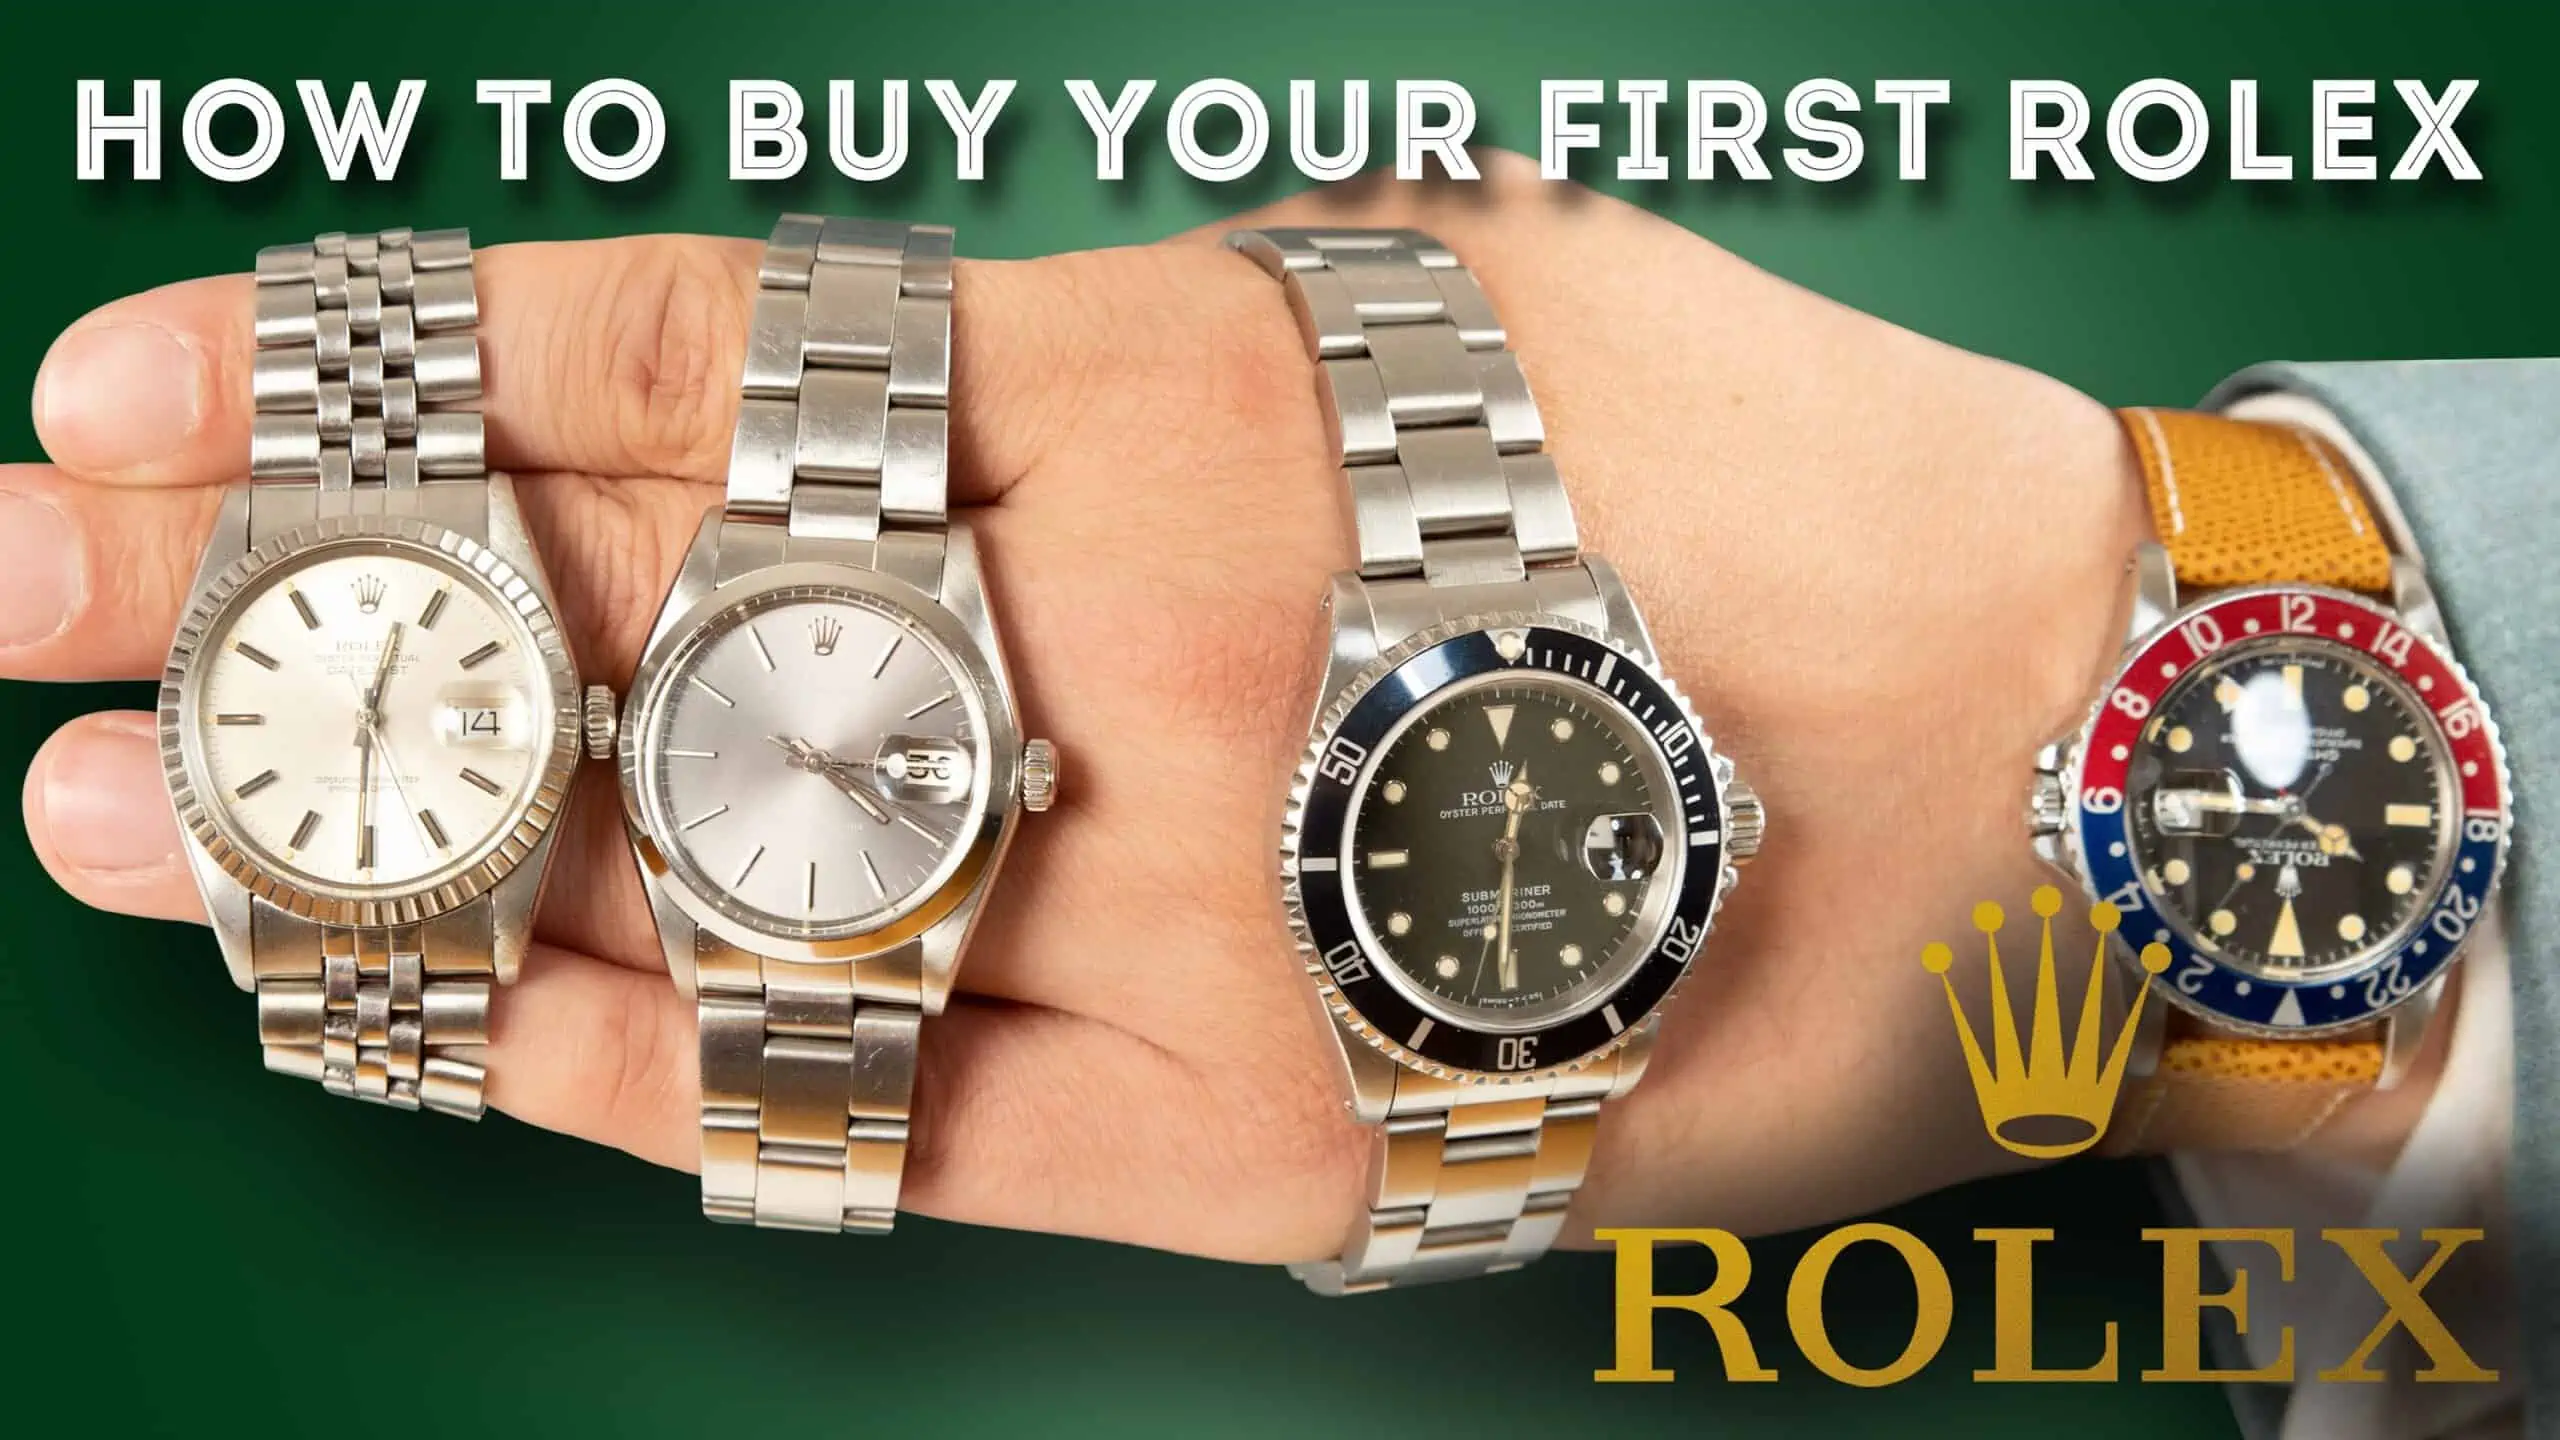 Vintage Rolex: The essential guide to the most iconic luxury watch